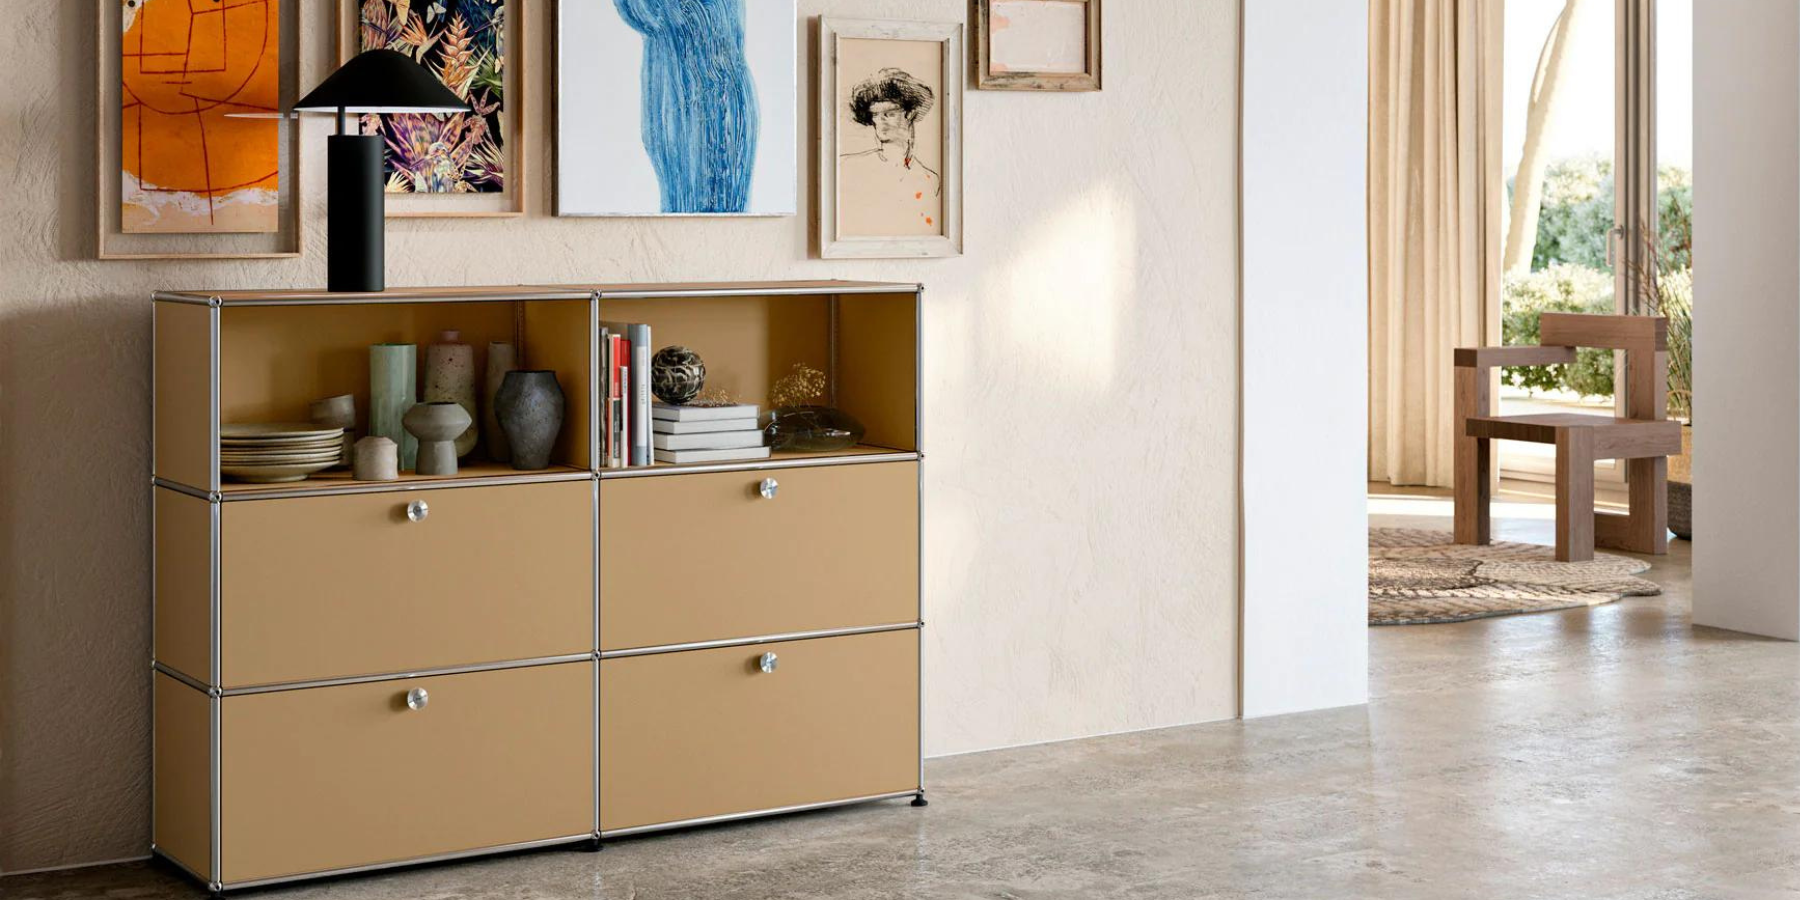 Modern olive-green modular storage cabinet by One52 Furniture, showcasing clean lines and minimalist design, set against a textured white brick wall in a well-lit room with tasteful decor.